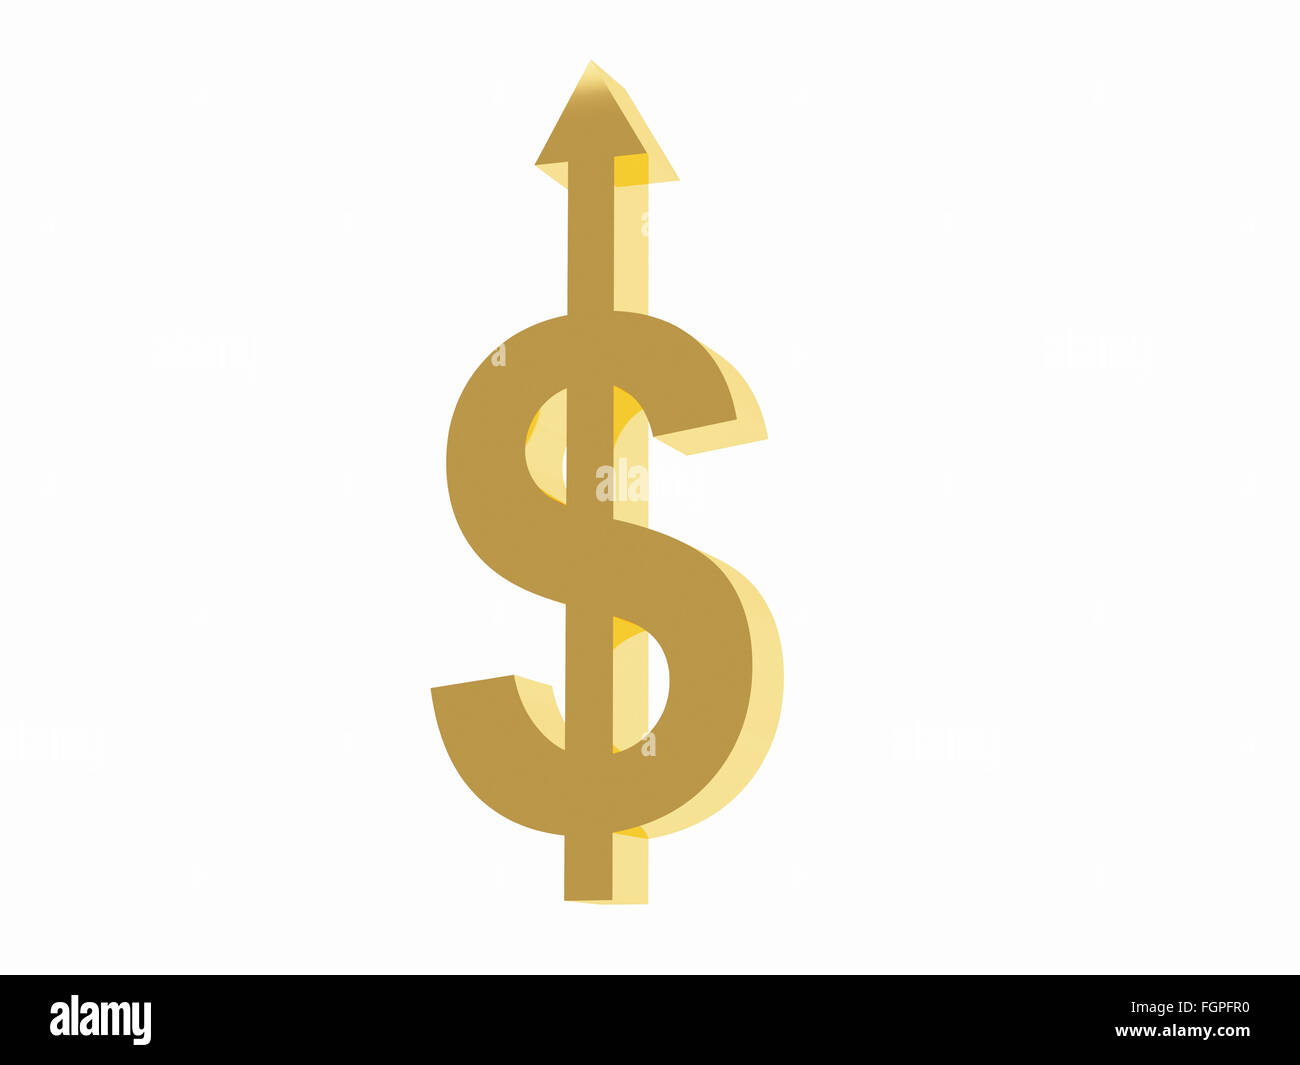 Dollar symbol isolated over a white background. High resolution image. Stock Photo